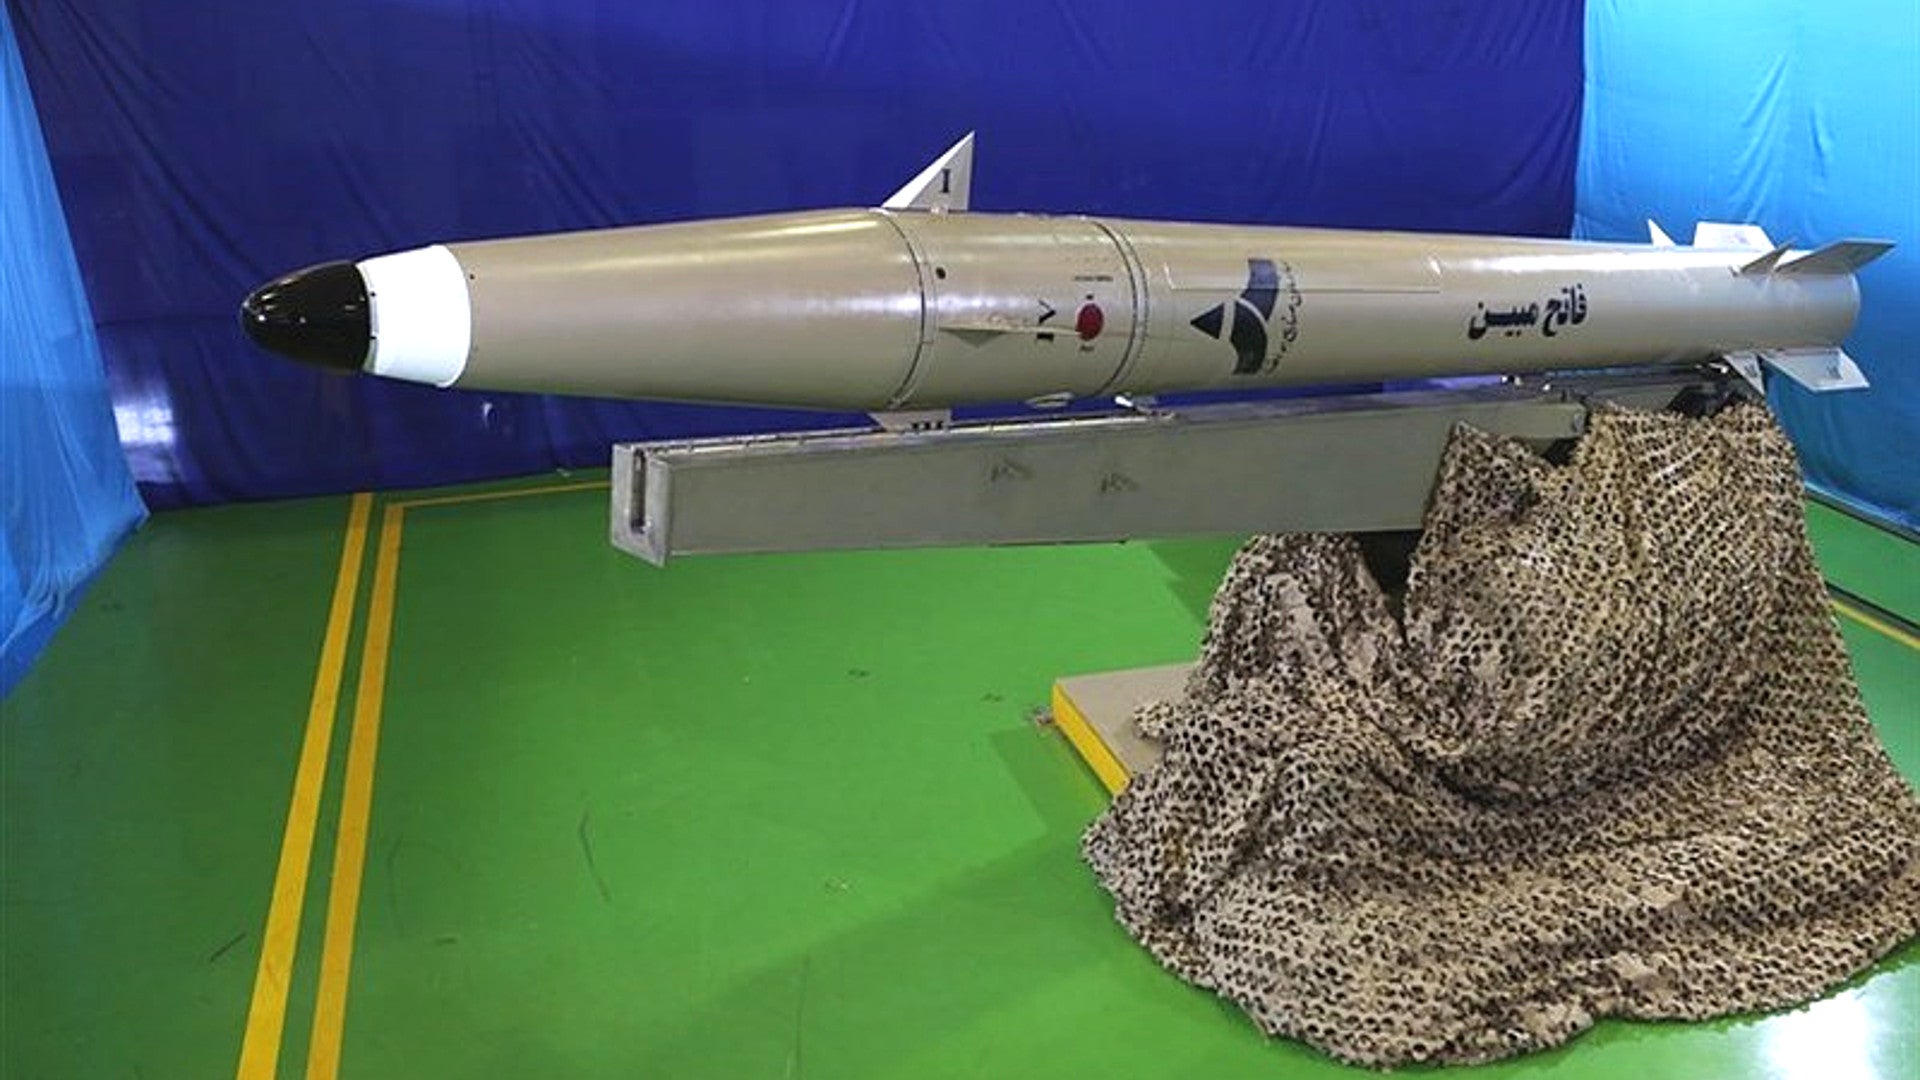 Iran Reveals Upgraded Short Range Ballistic Missile It Claims Is ‘Stealthy’ and More Precise